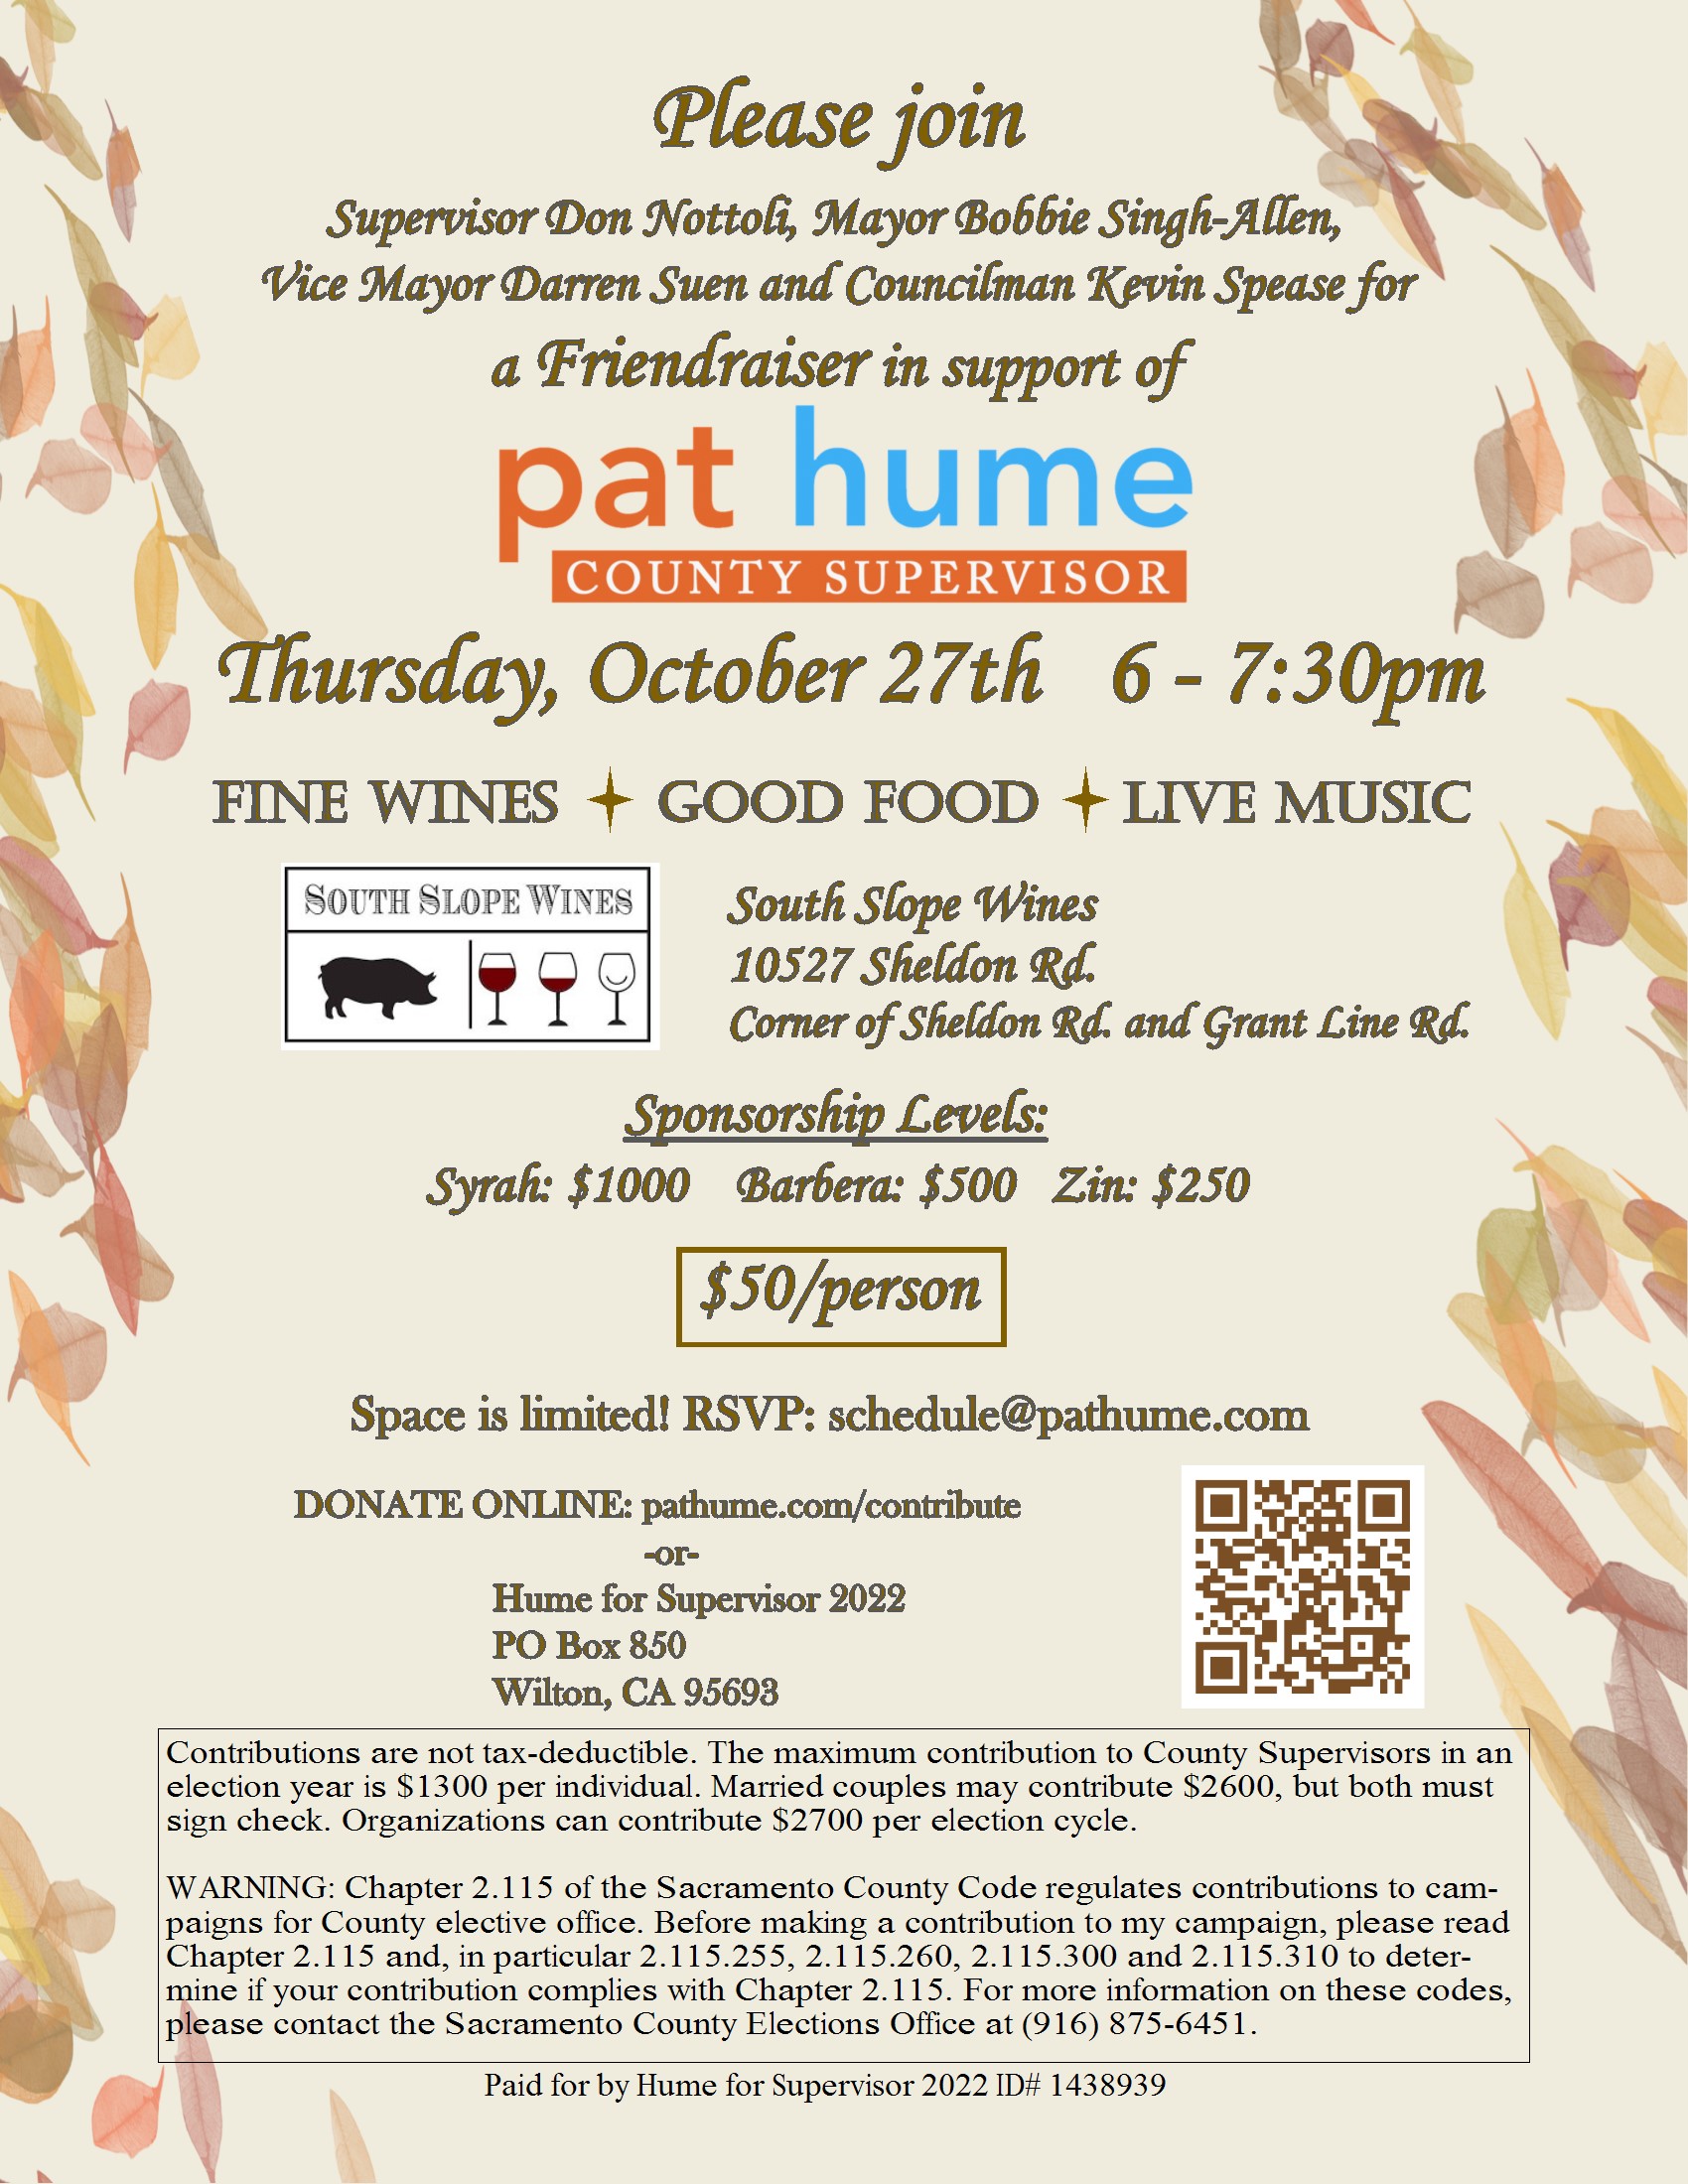 Product Image for Pat Hume Event Oct 27th